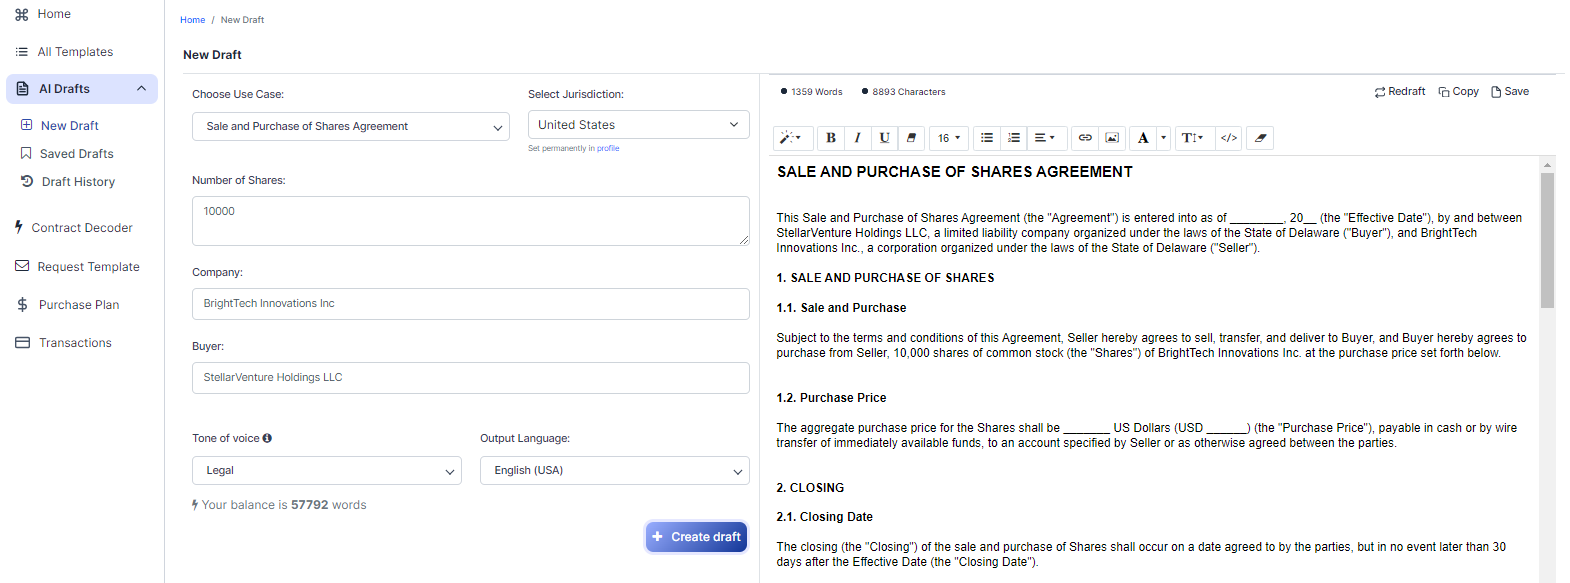 Sale and Purchase of Shares Agreement template